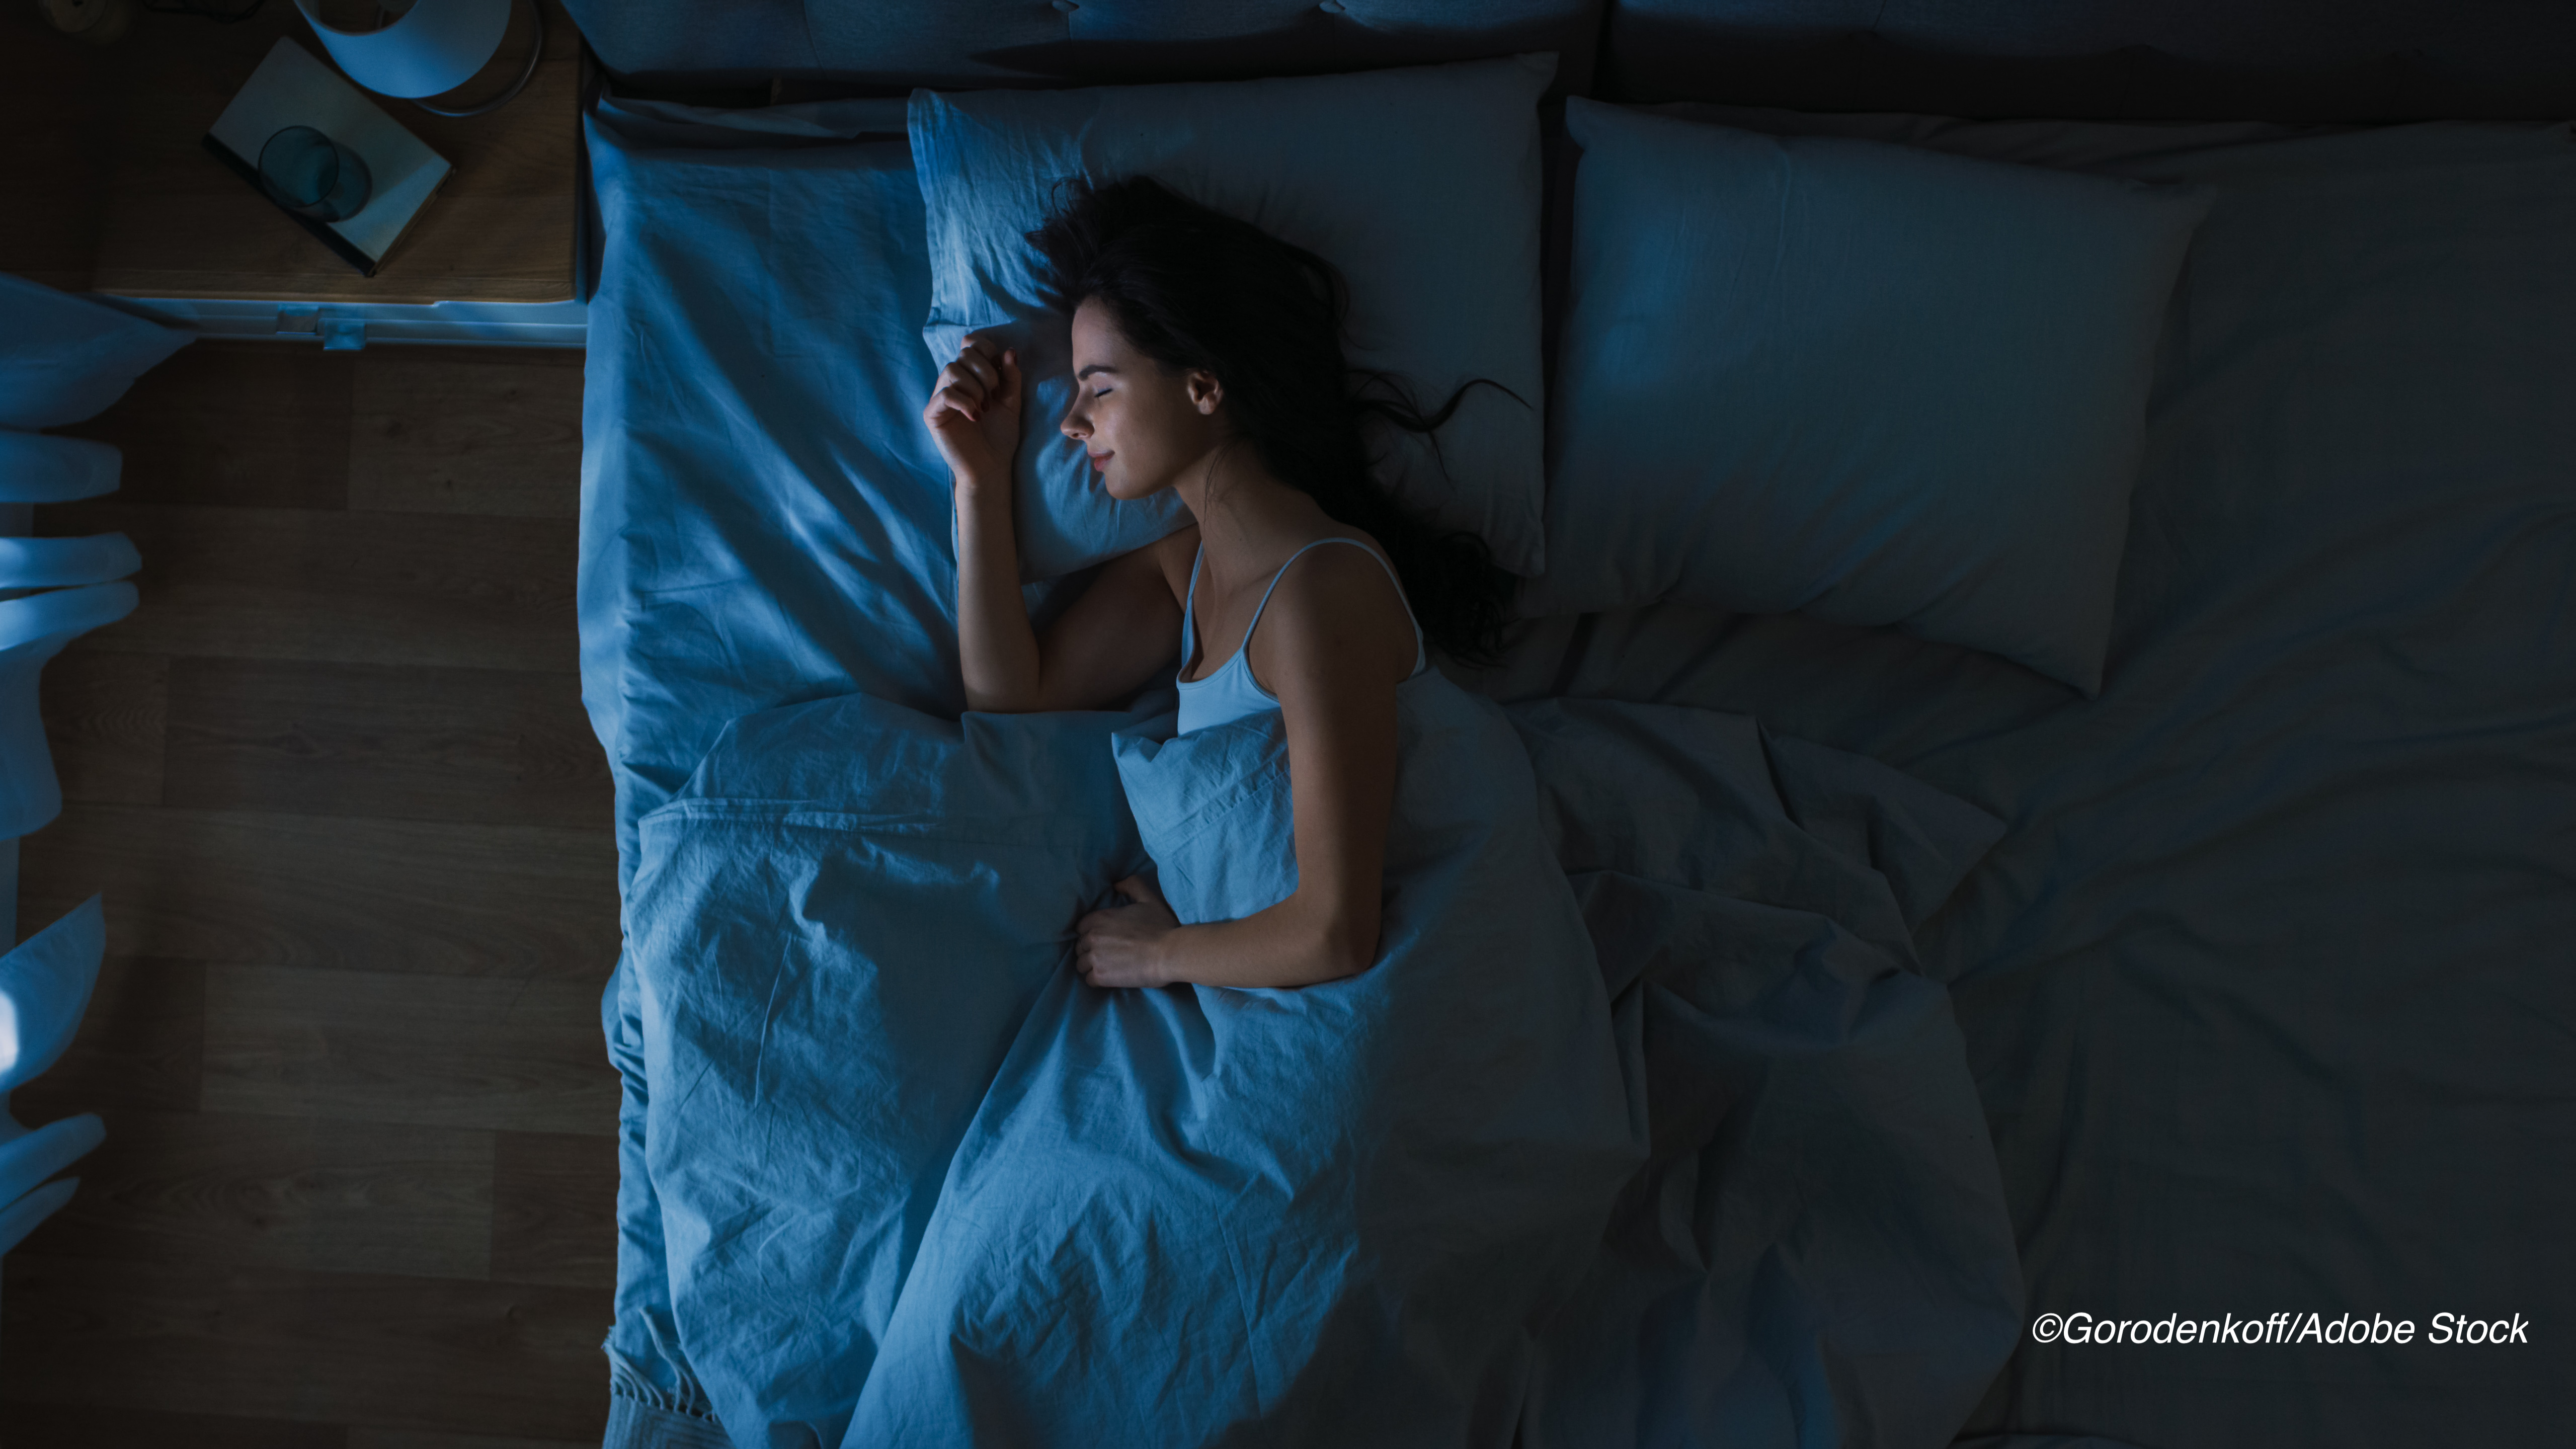 Frequent Interrupted Sleep Seen as Premature Mortality Risk in Women